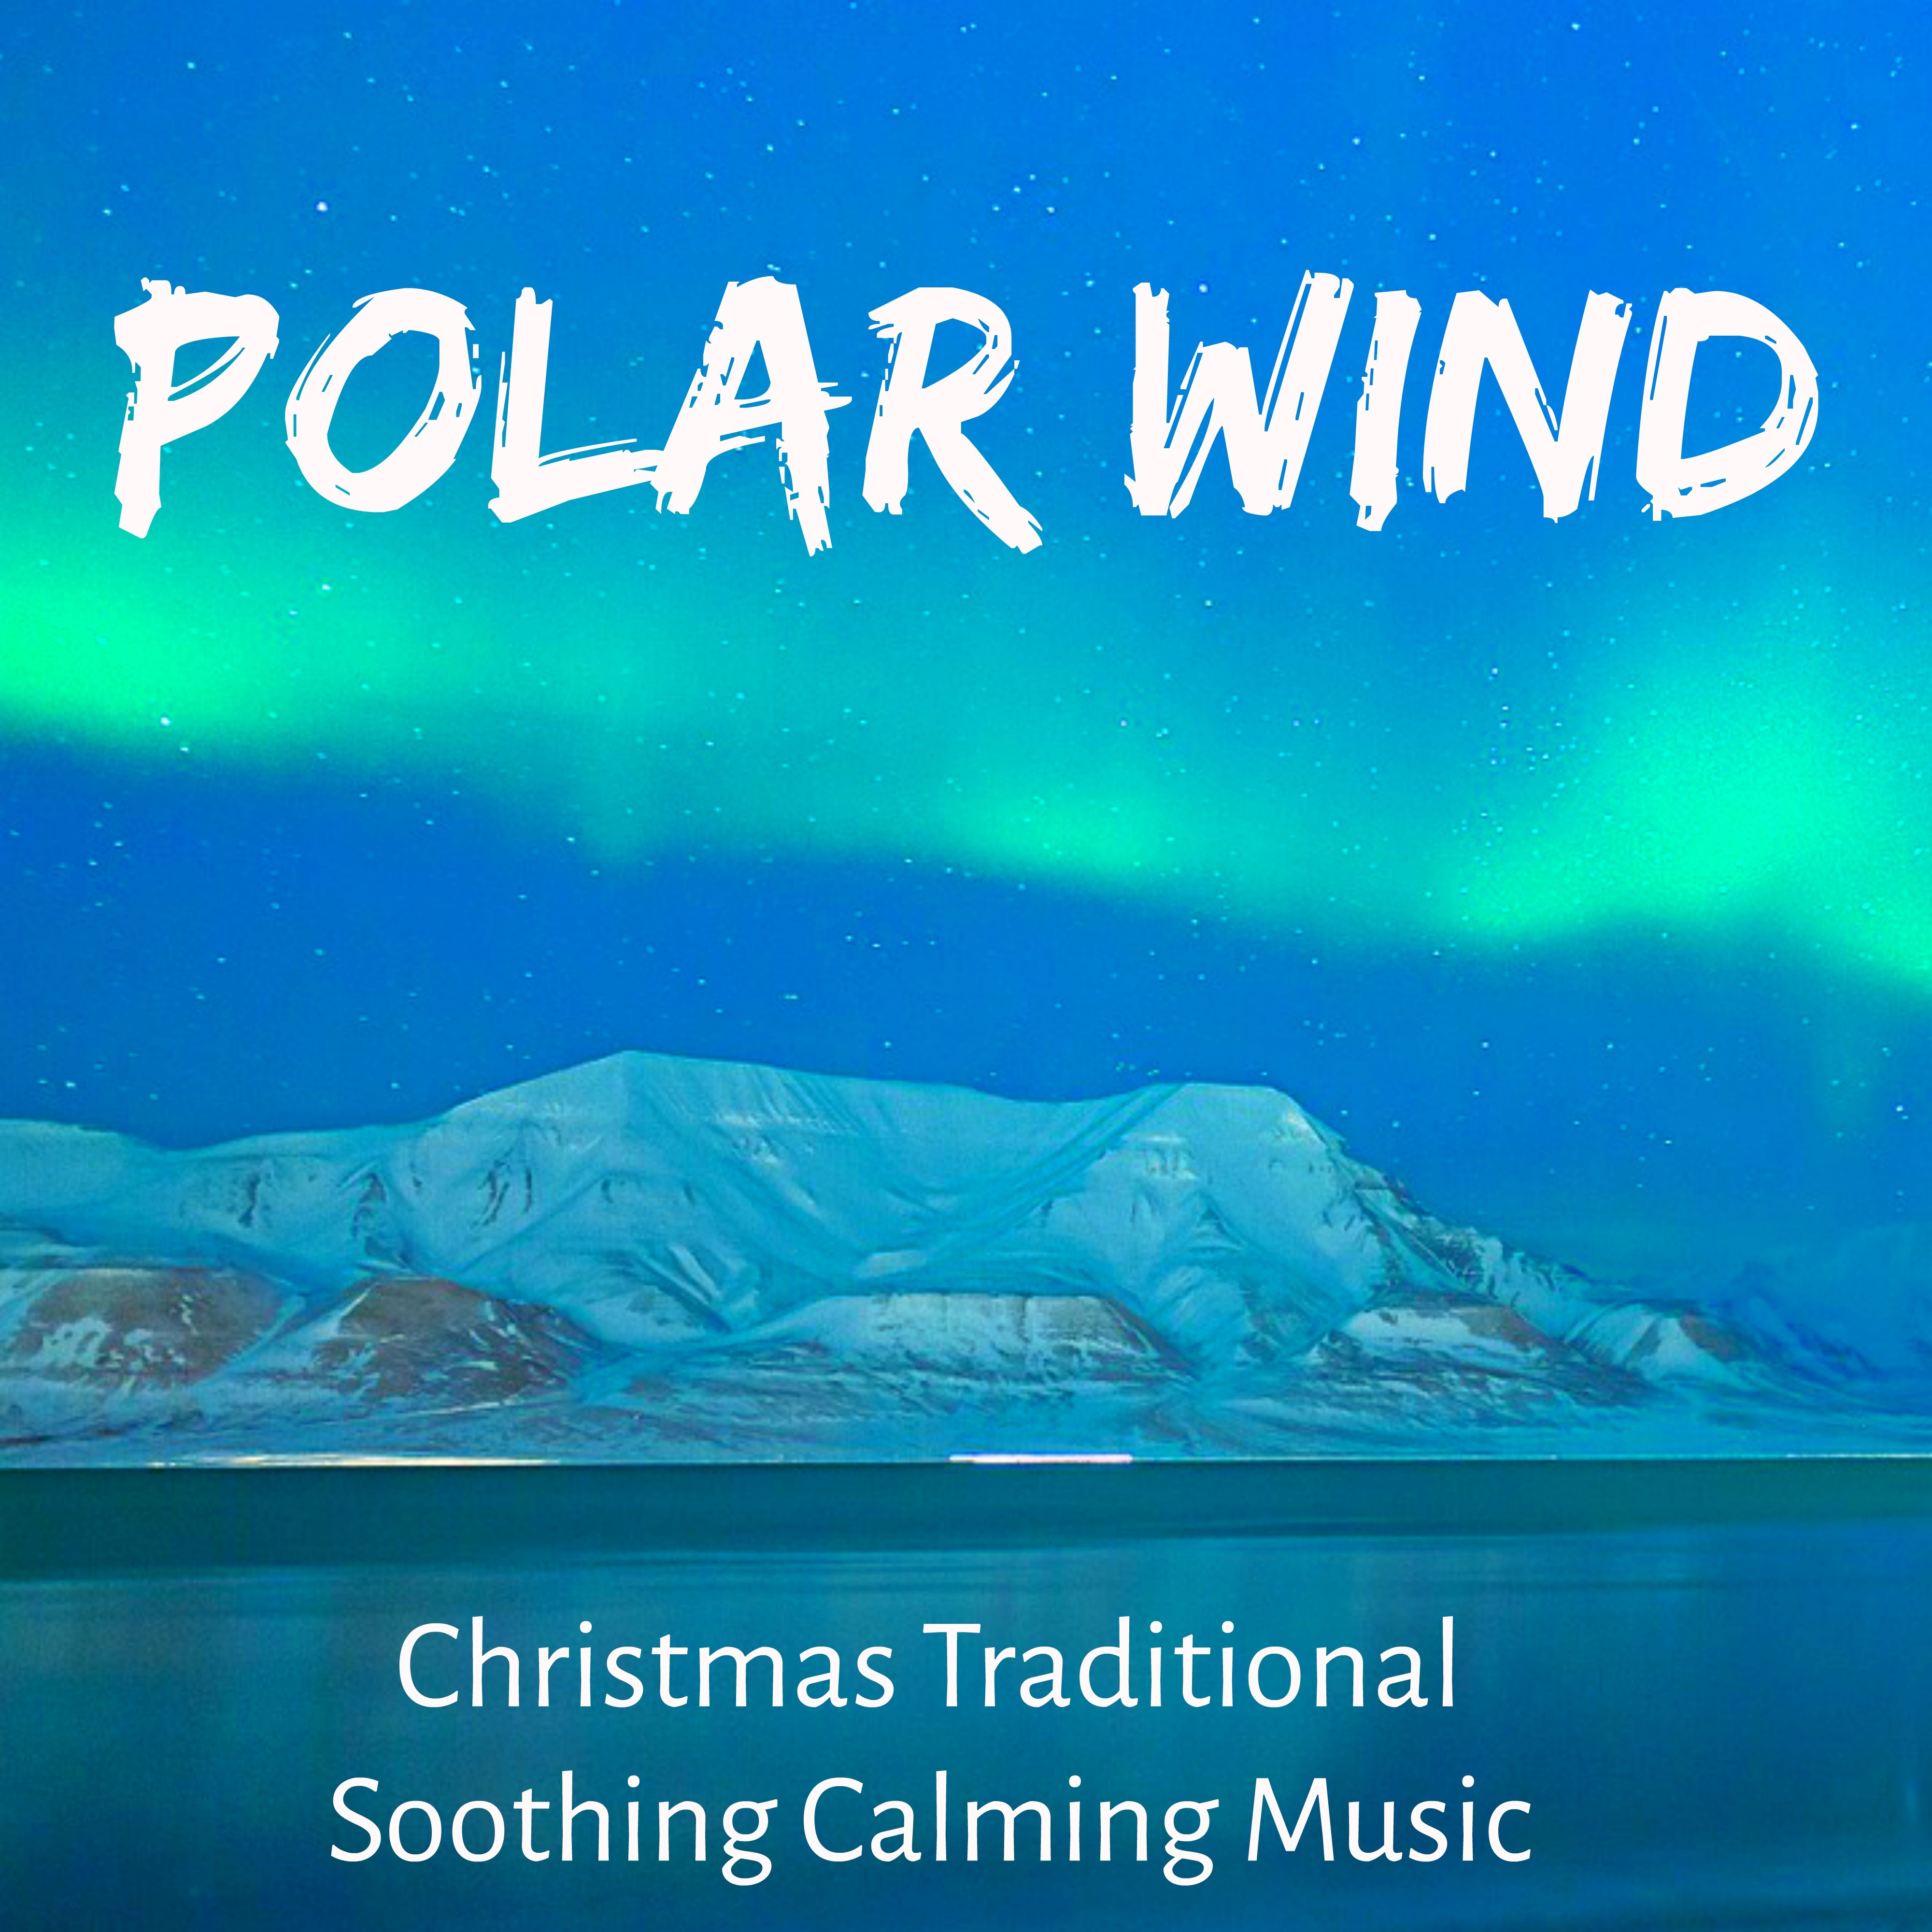 Polar Wind - Christmas Traditional Soothing Calming Music for Winter Party Spa Holidays Inside Health with Nature New Age Relaxing Sounds